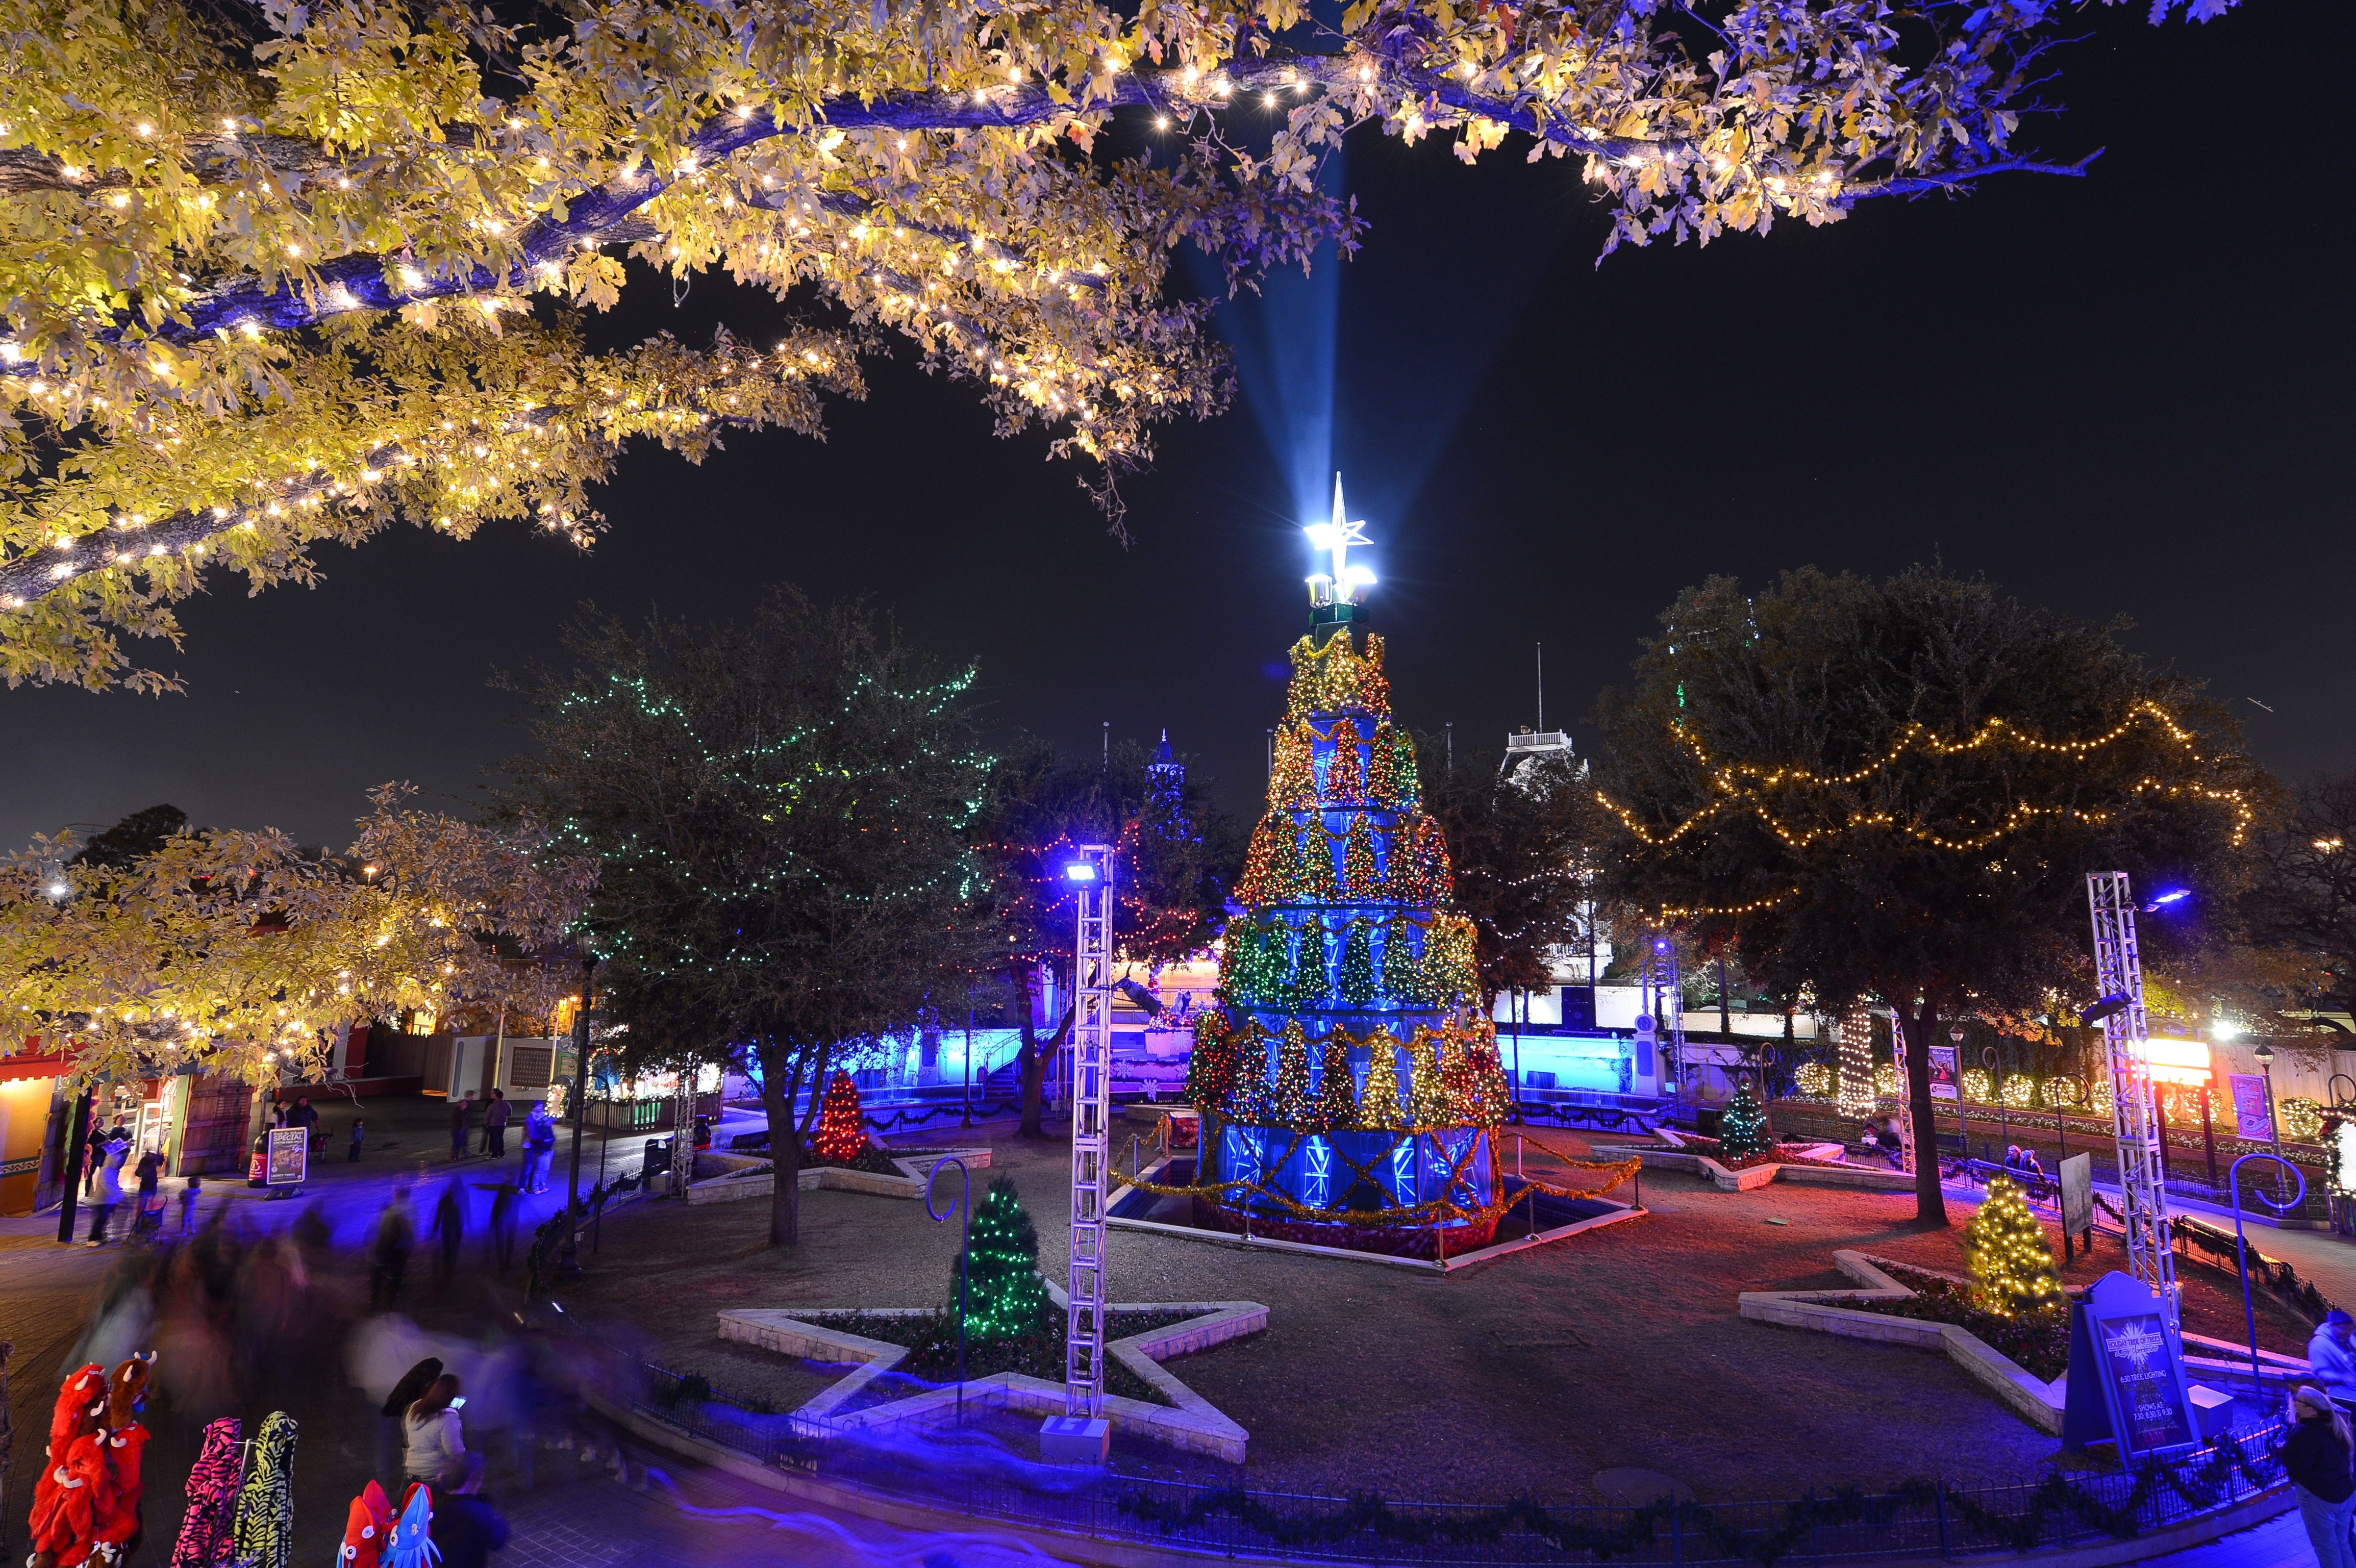 Holiday in the park at Six Flags Over Texas Arlington